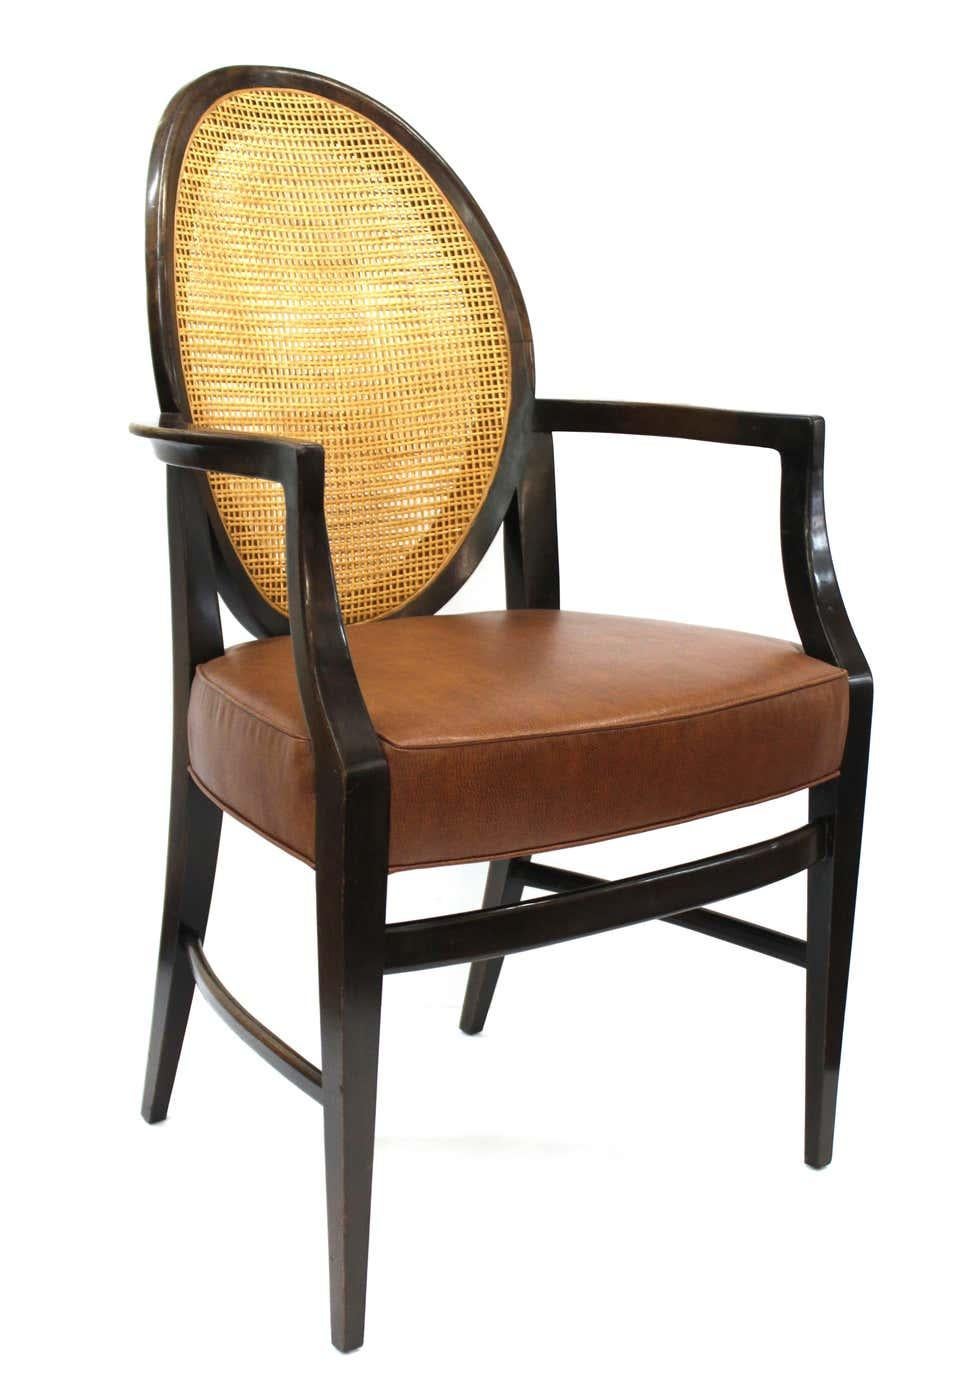 American Mid-Century Modern Armchairs with Caned Backs Seat Attributed to Harvey Probber